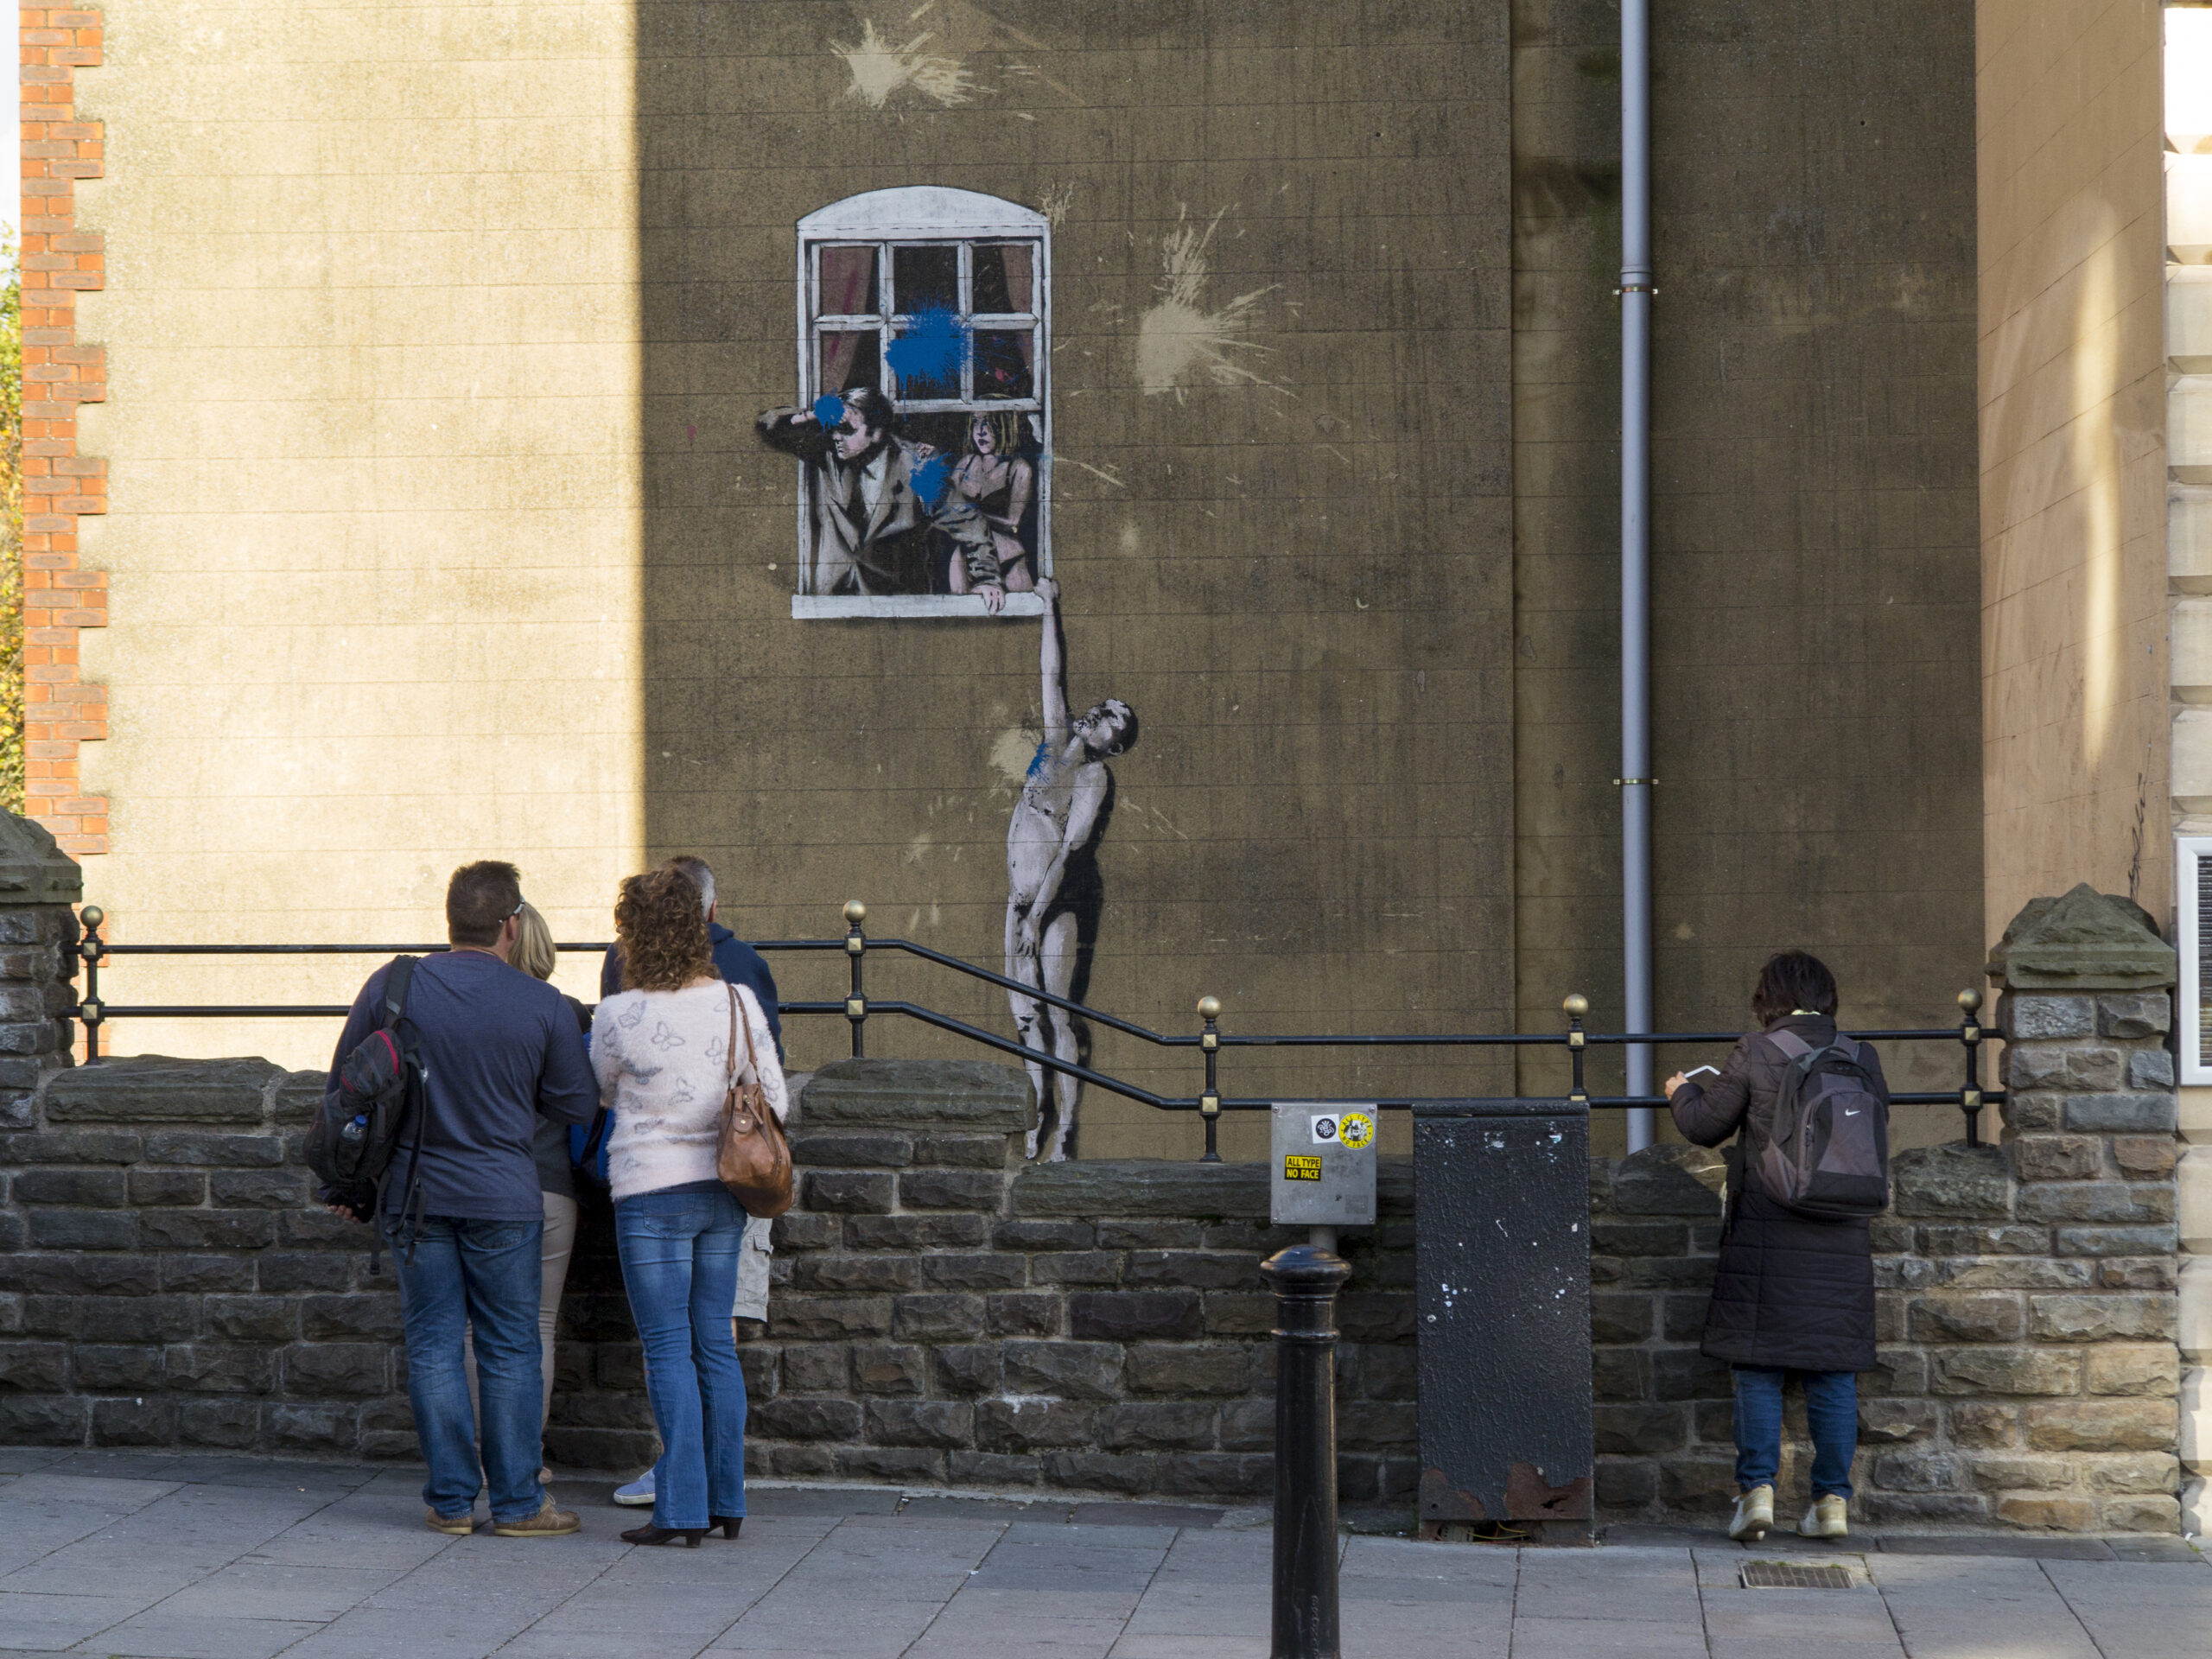 Much of Banksy's art has appeared in what's thought to be his home city Bristol